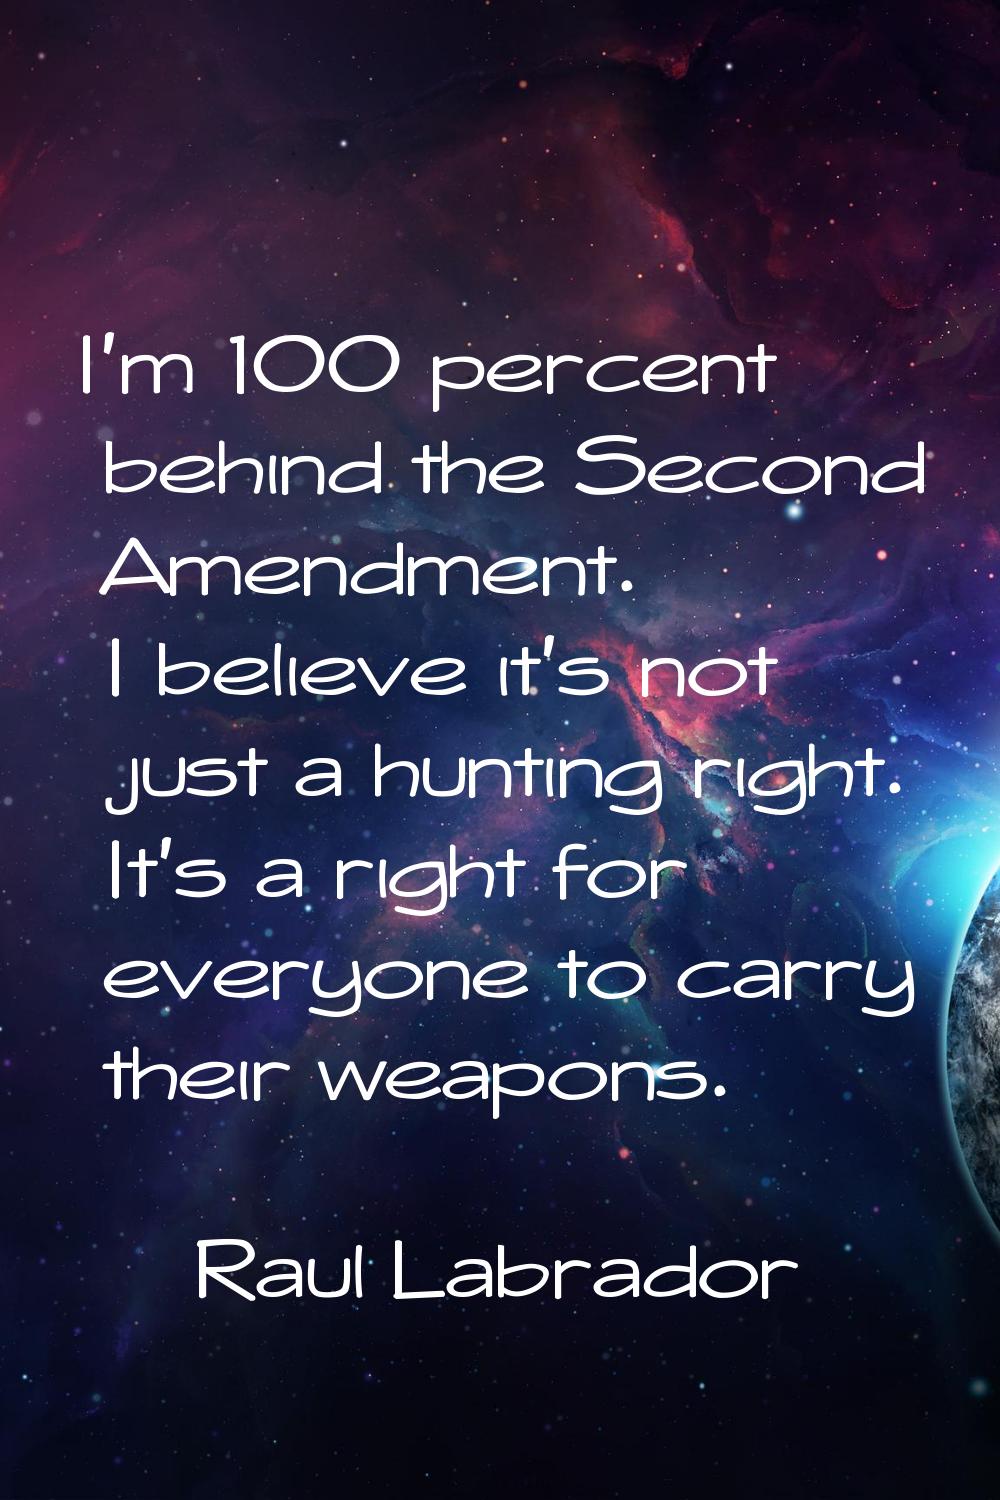 I'm 100 percent behind the Second Amendment. I believe it's not just a hunting right. It's a right 